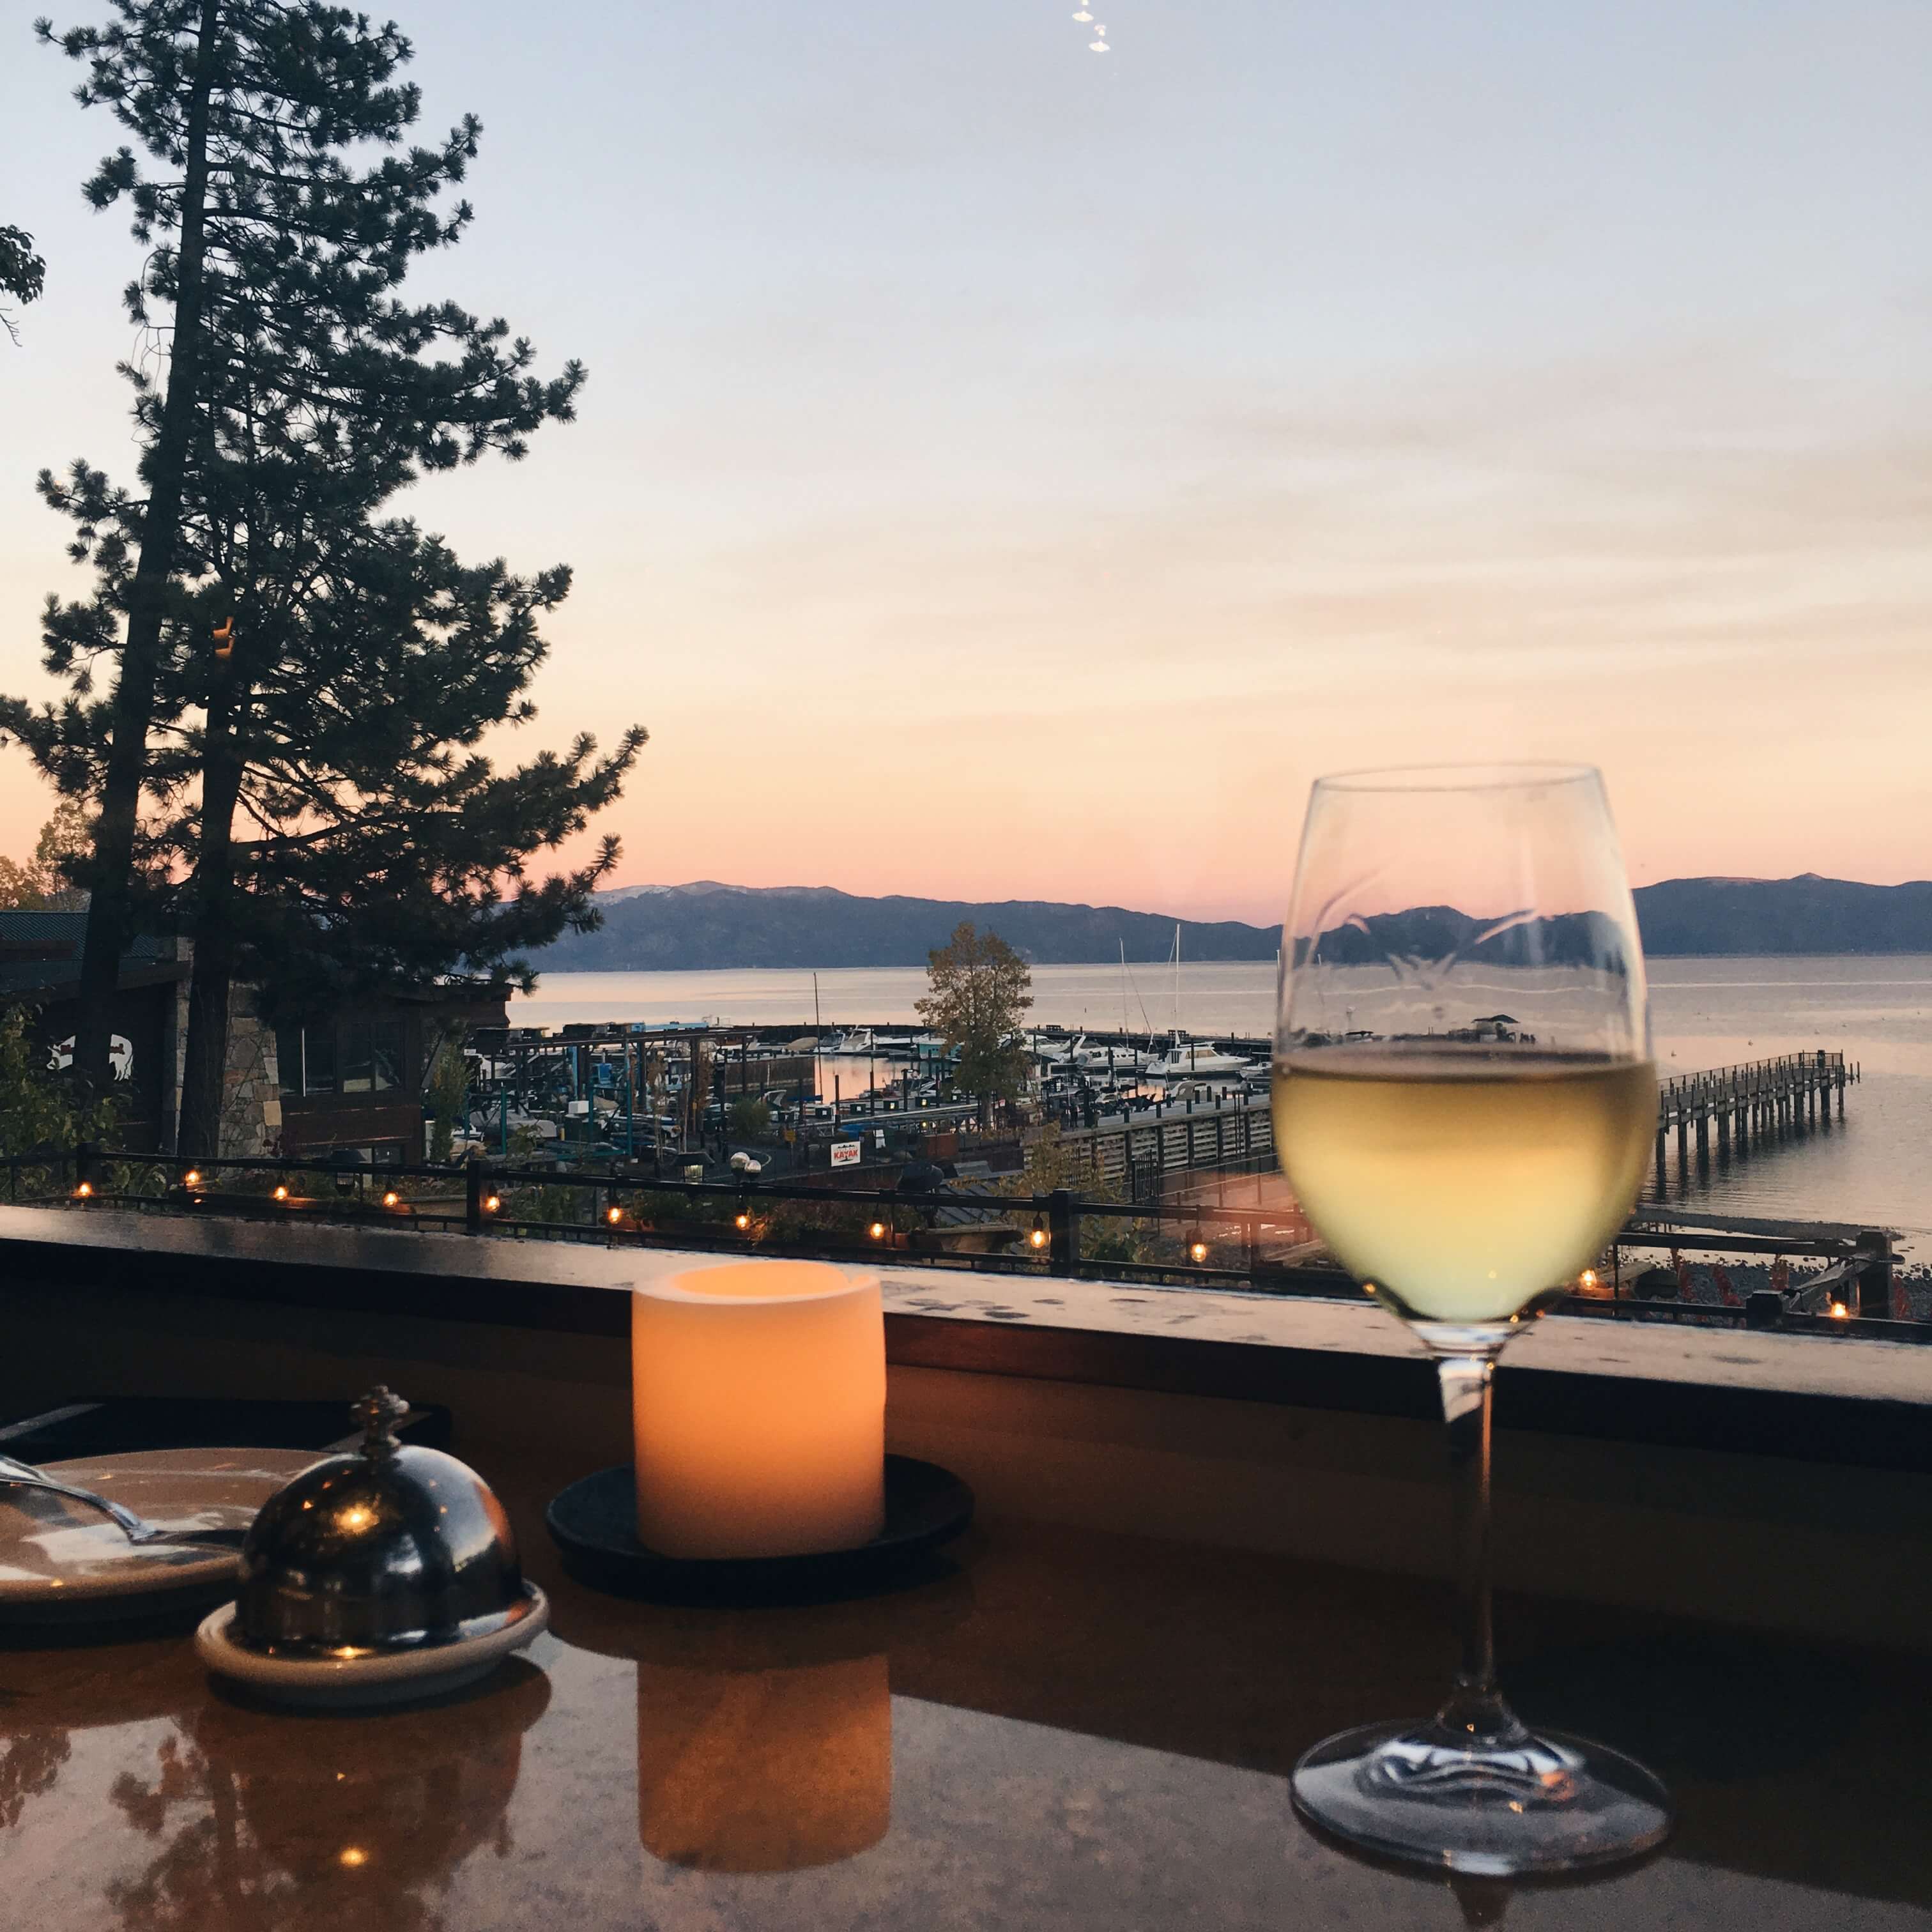 Lake Tahoe Travel Guide - Christy Hill Restaurant View from Table